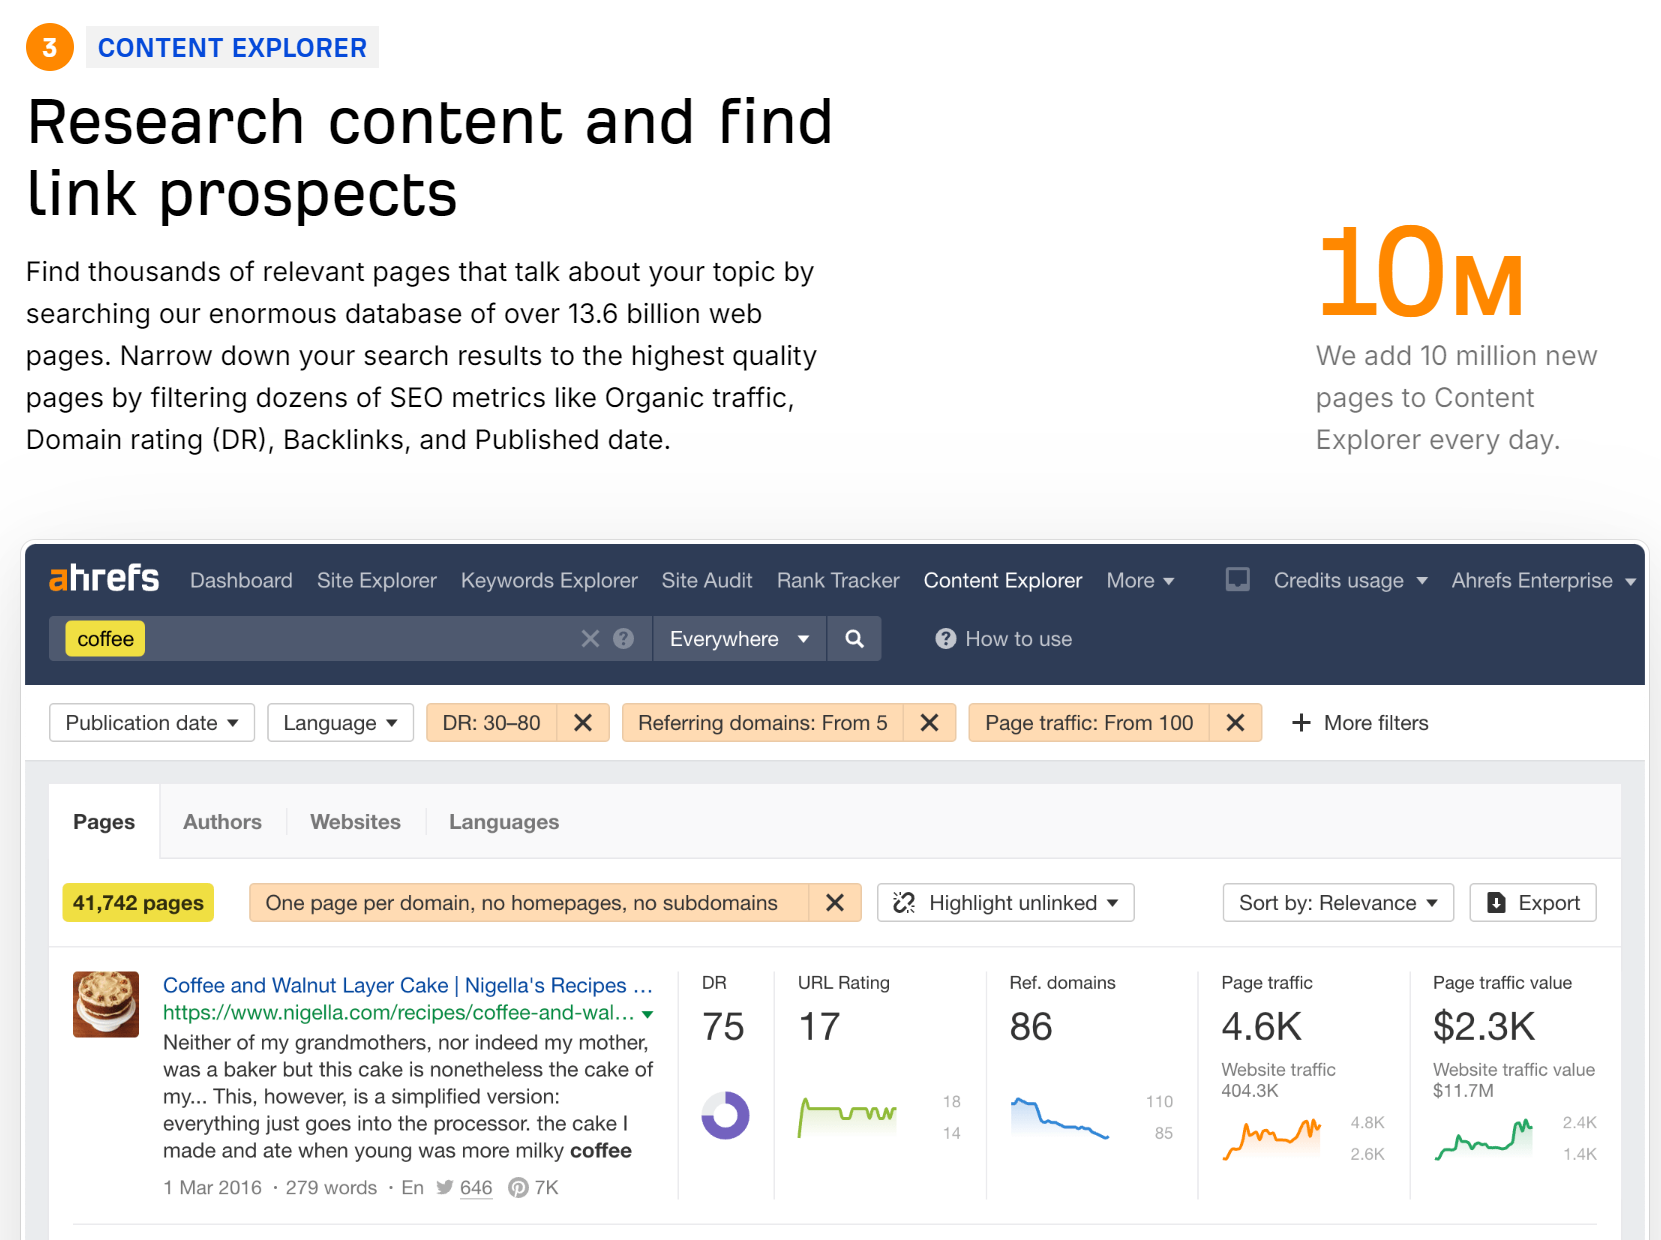 Ahrefs highlights how it helps SEOs research content and find link prospects